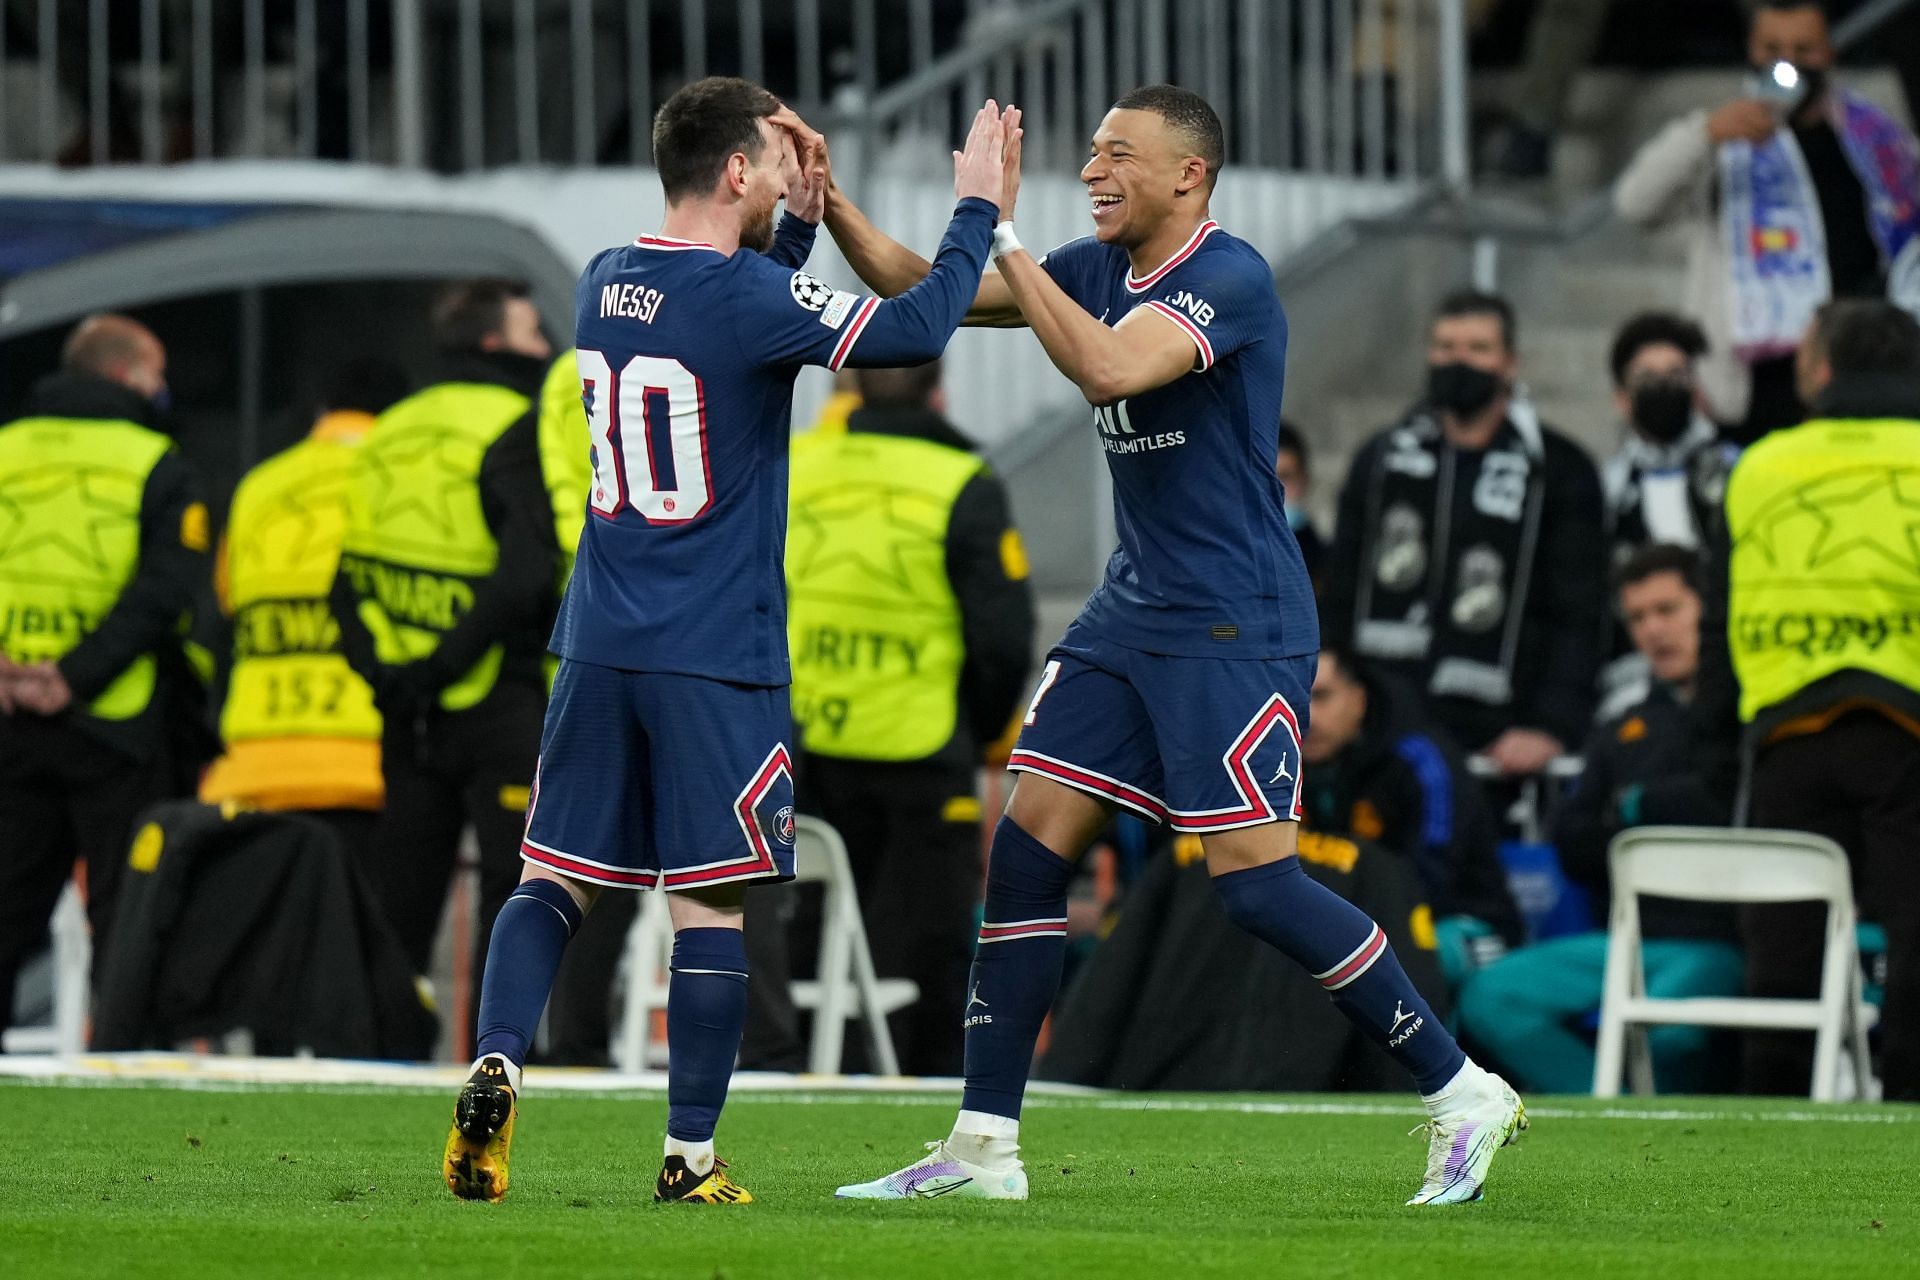 Lionel Messi and Kylian Mbappe in action for PSG